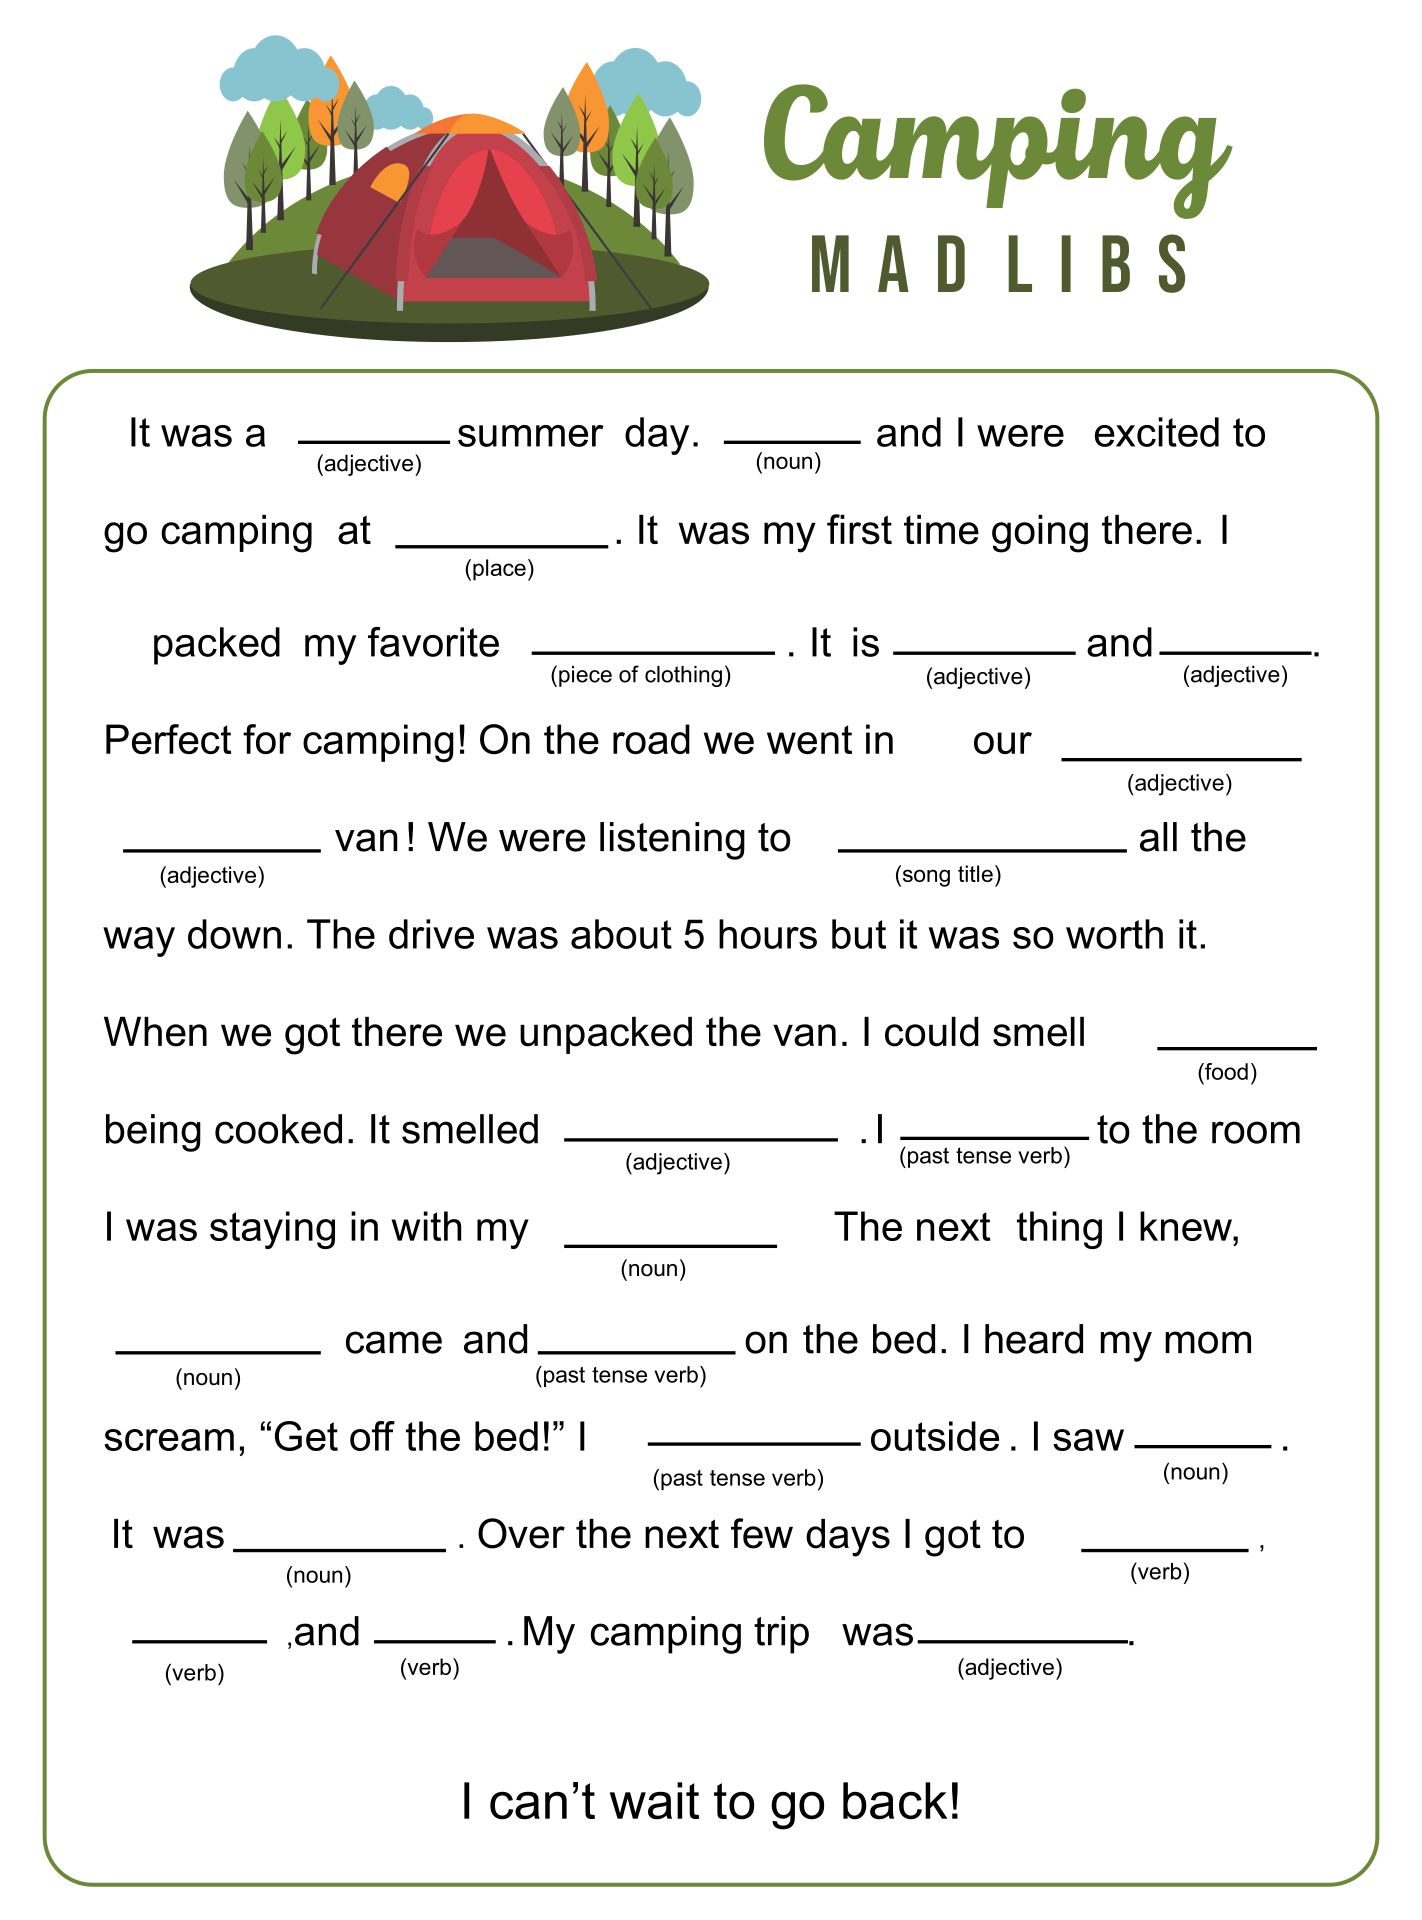 10 Best Camping Mad Libs Printable